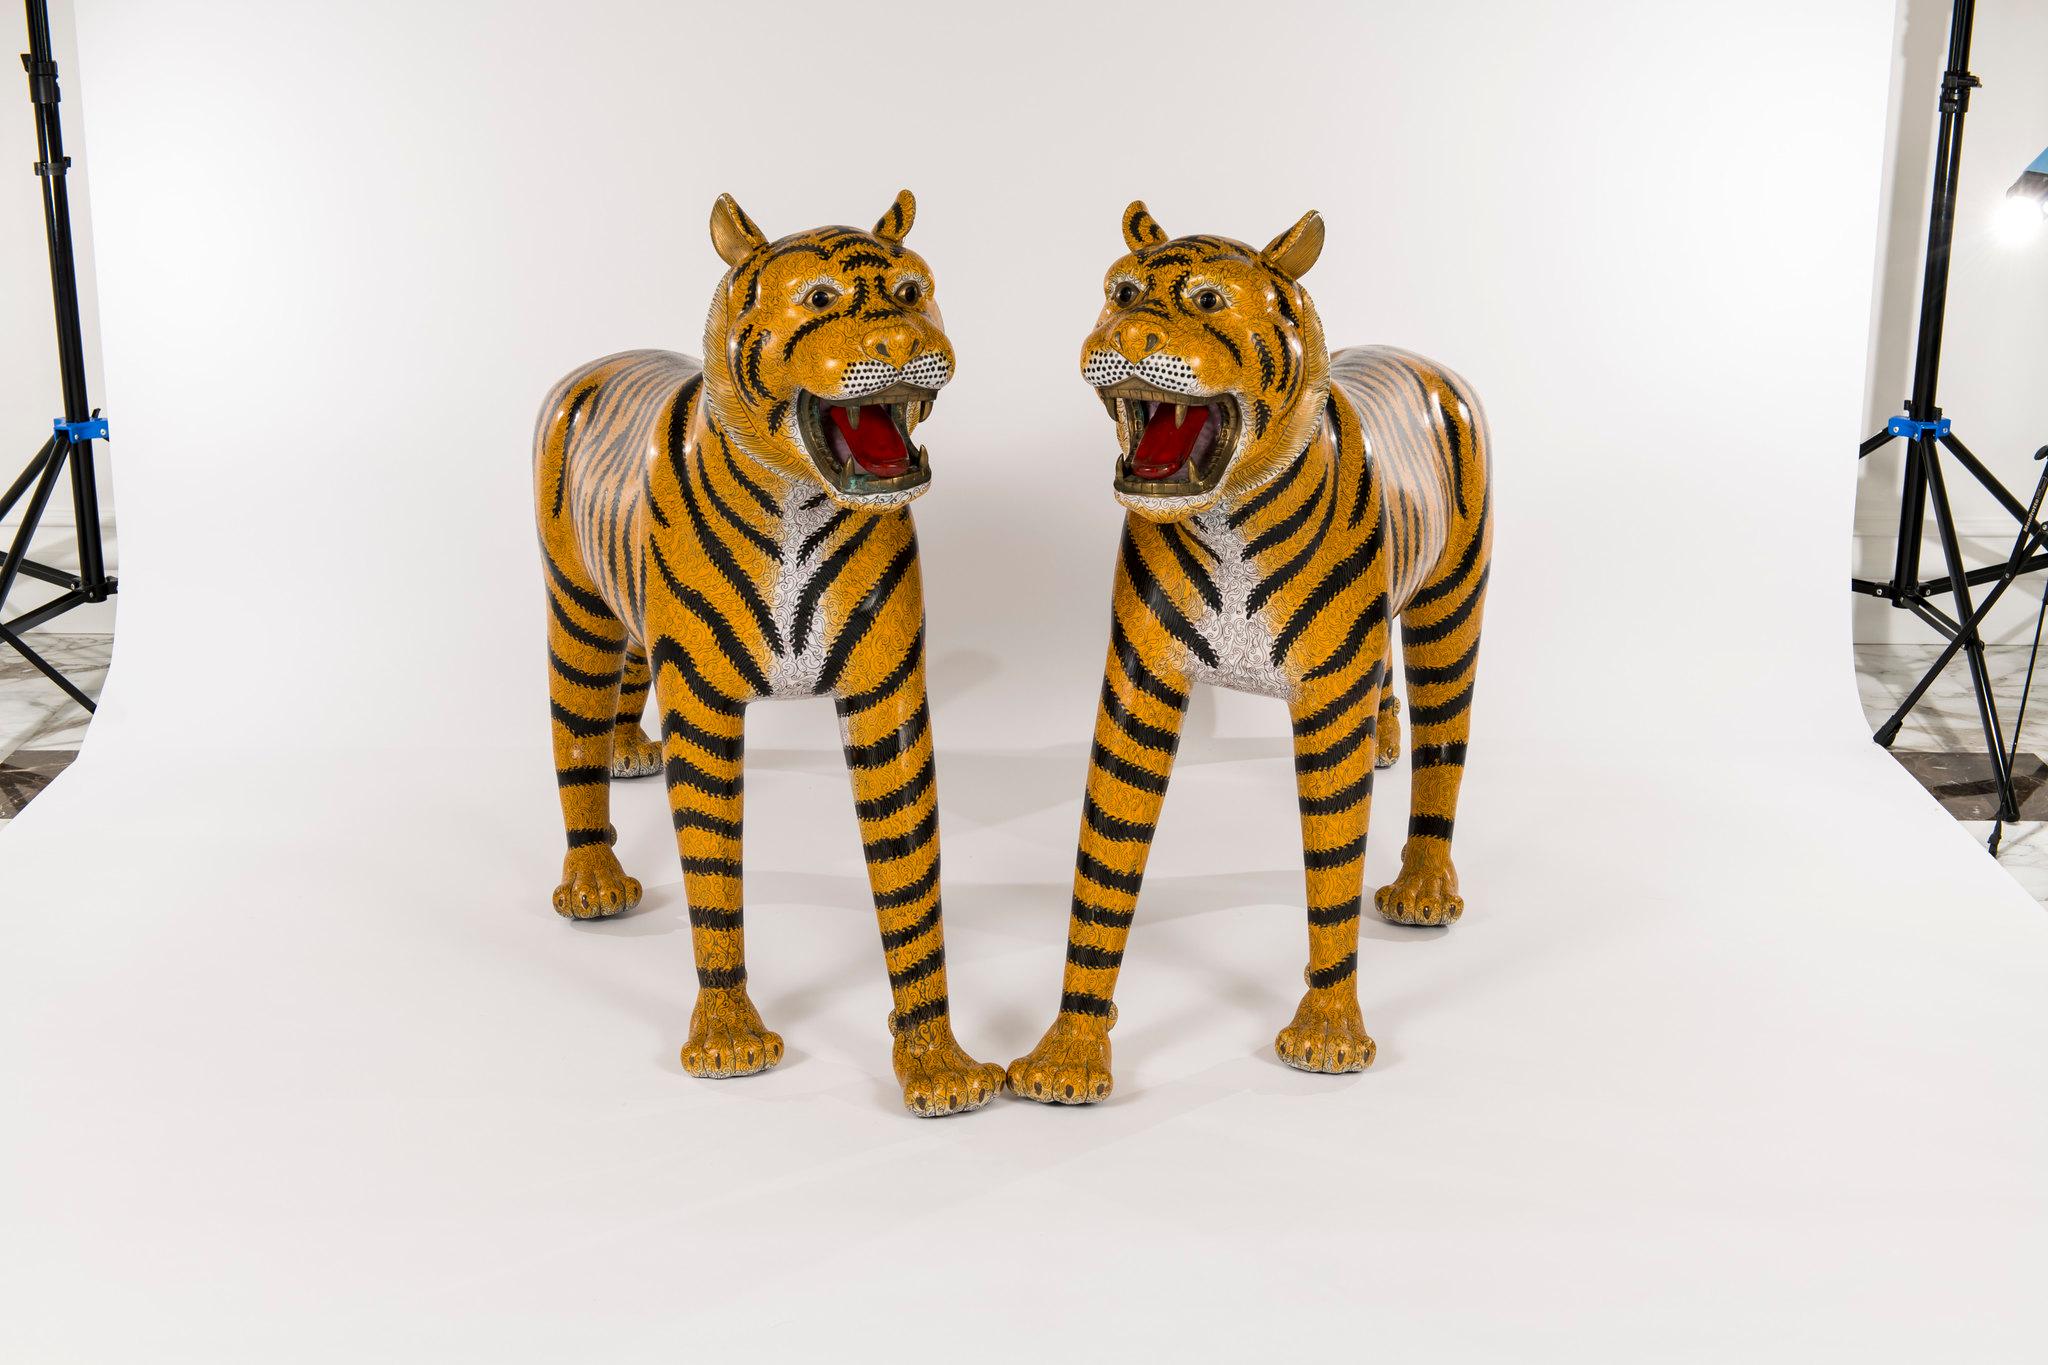 A stunning pair of late 20th century life-size Chinese cloisonné tigers from the Baron Estate. 

In Chinese symbolism, these tigers represents the masculine principle in nature and is king of all the animals, as shown by the four stripes on his